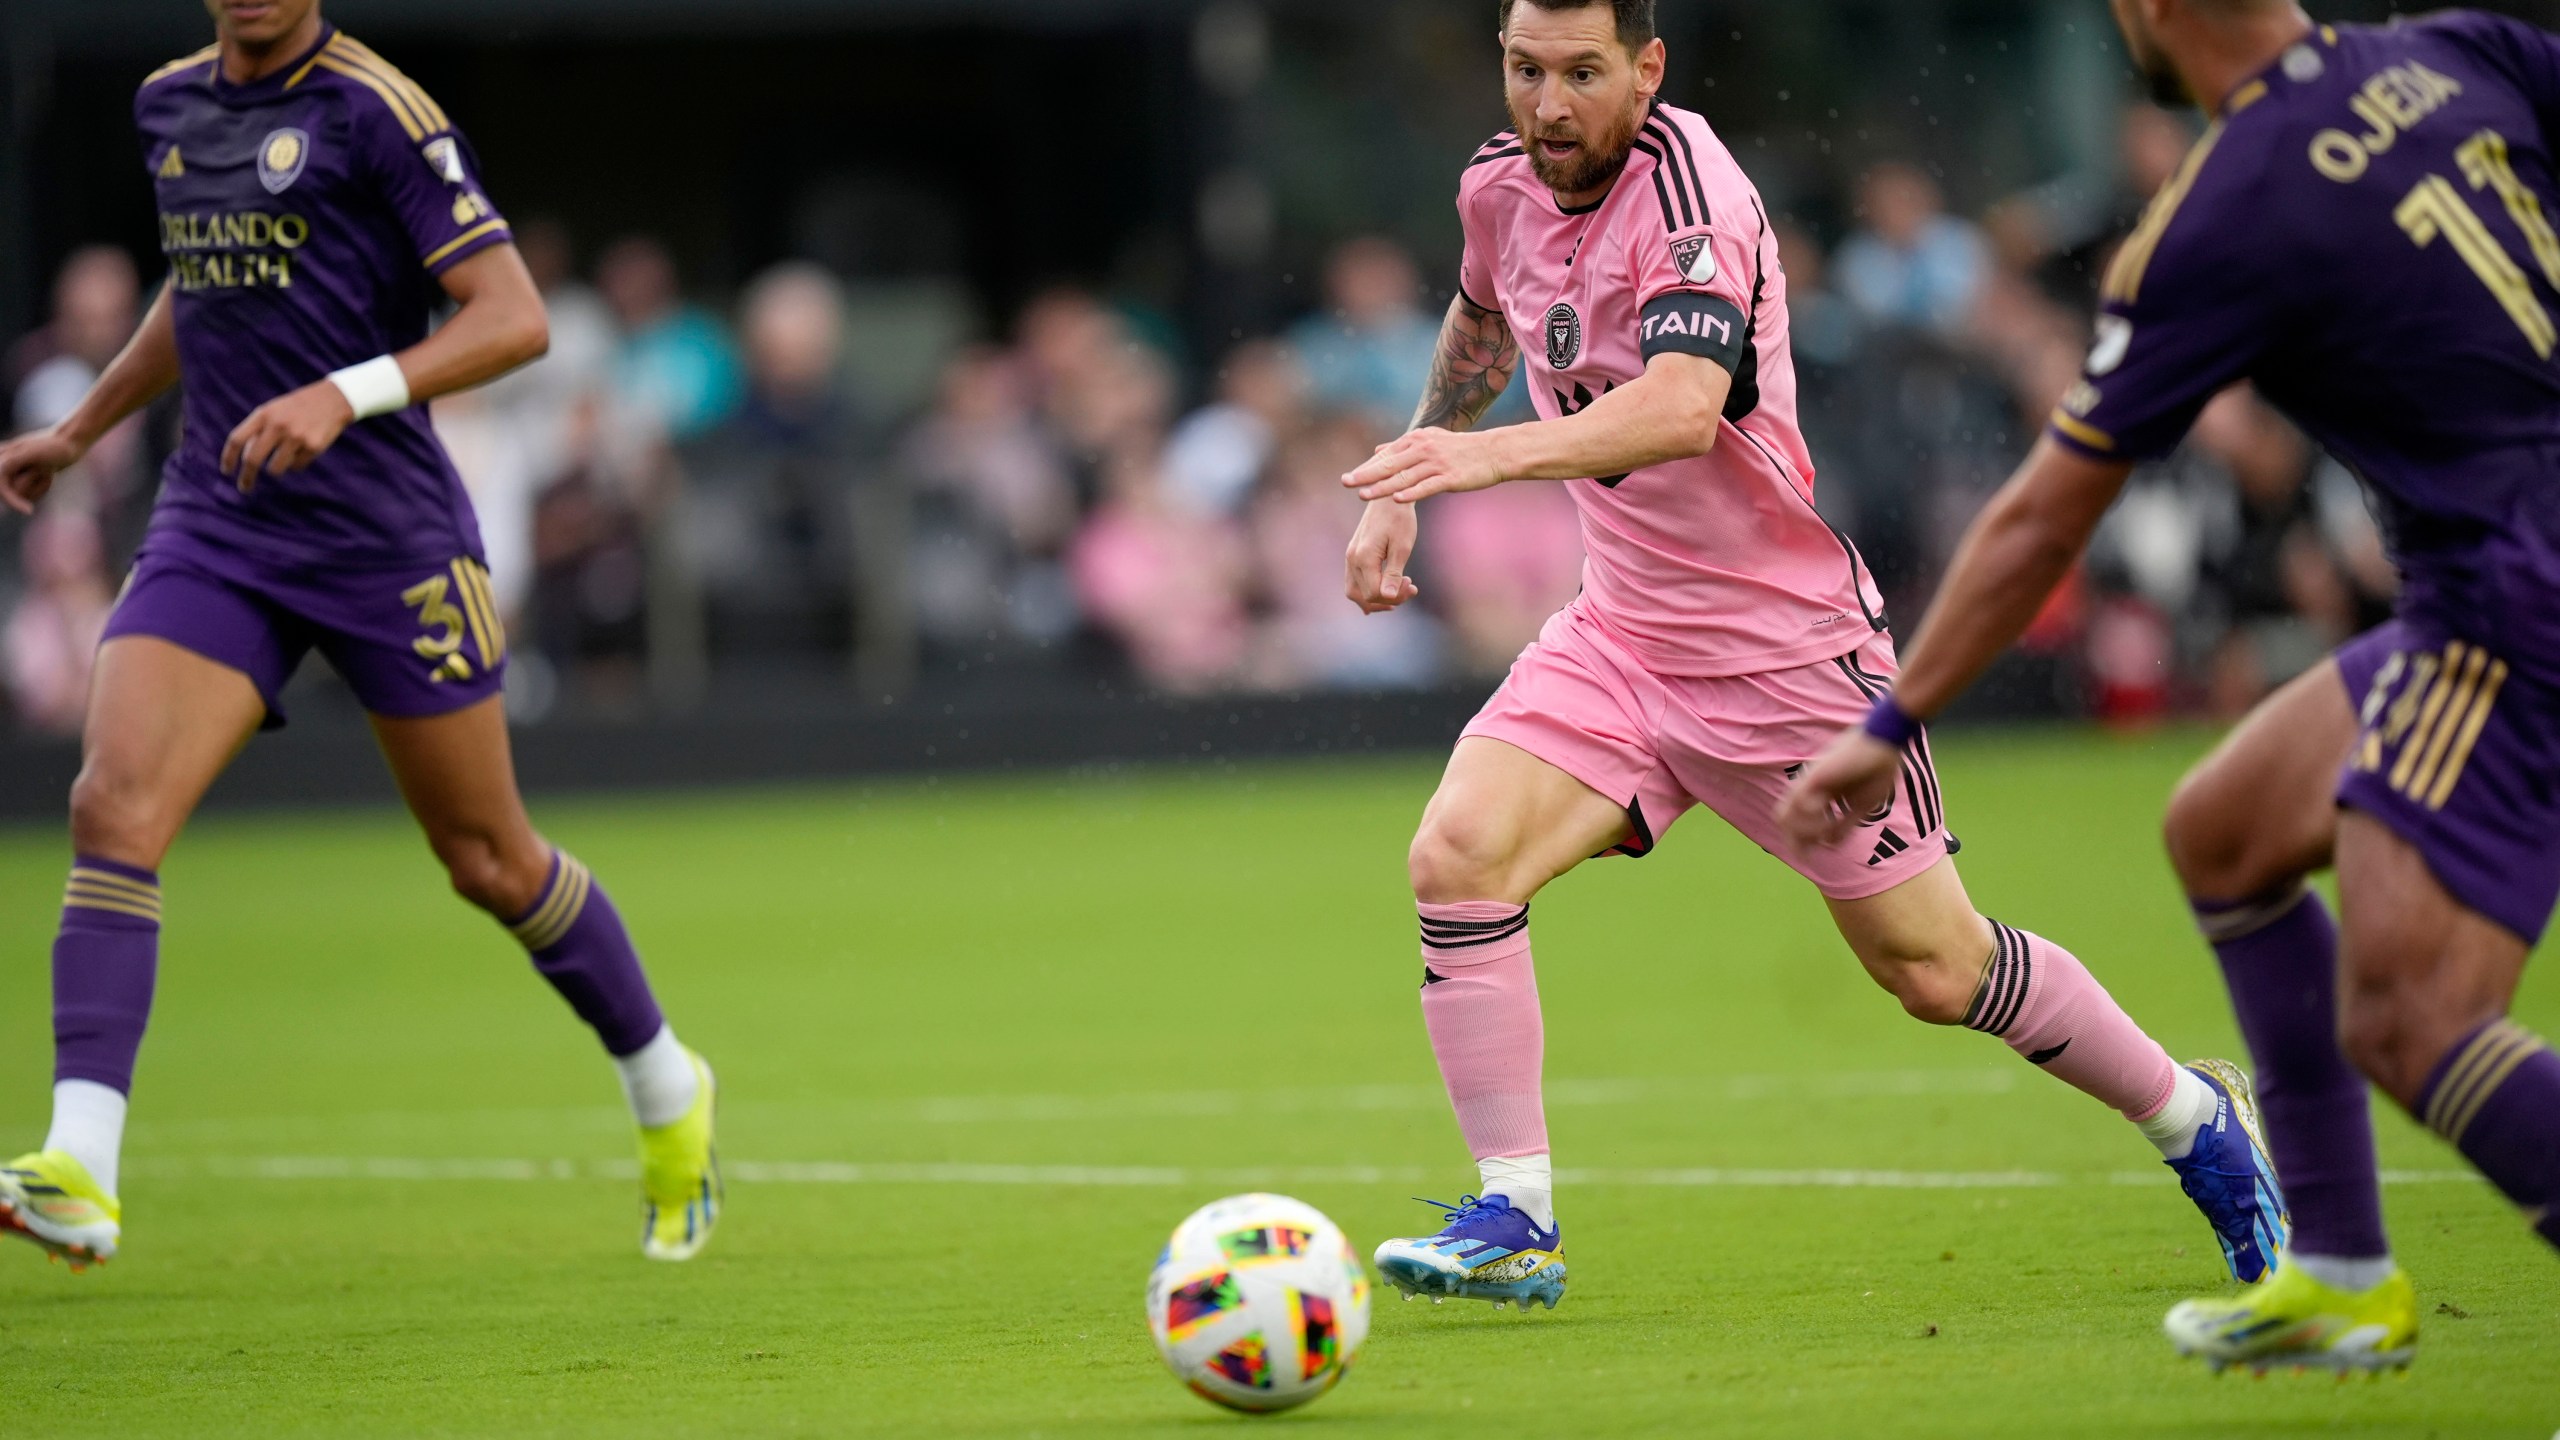 Inter Miami forward Lionel Messi (10) dribbles the ball under pressure from Orlando City midfielder Martín Ojeda (11) and Orlando City defender Rafael Santos (3) during the first half of an MLS soccer match, Saturday, March 2, 2024, in Fort Lauderdale, Fla. (AP Photo/Rebecca Blackwell)